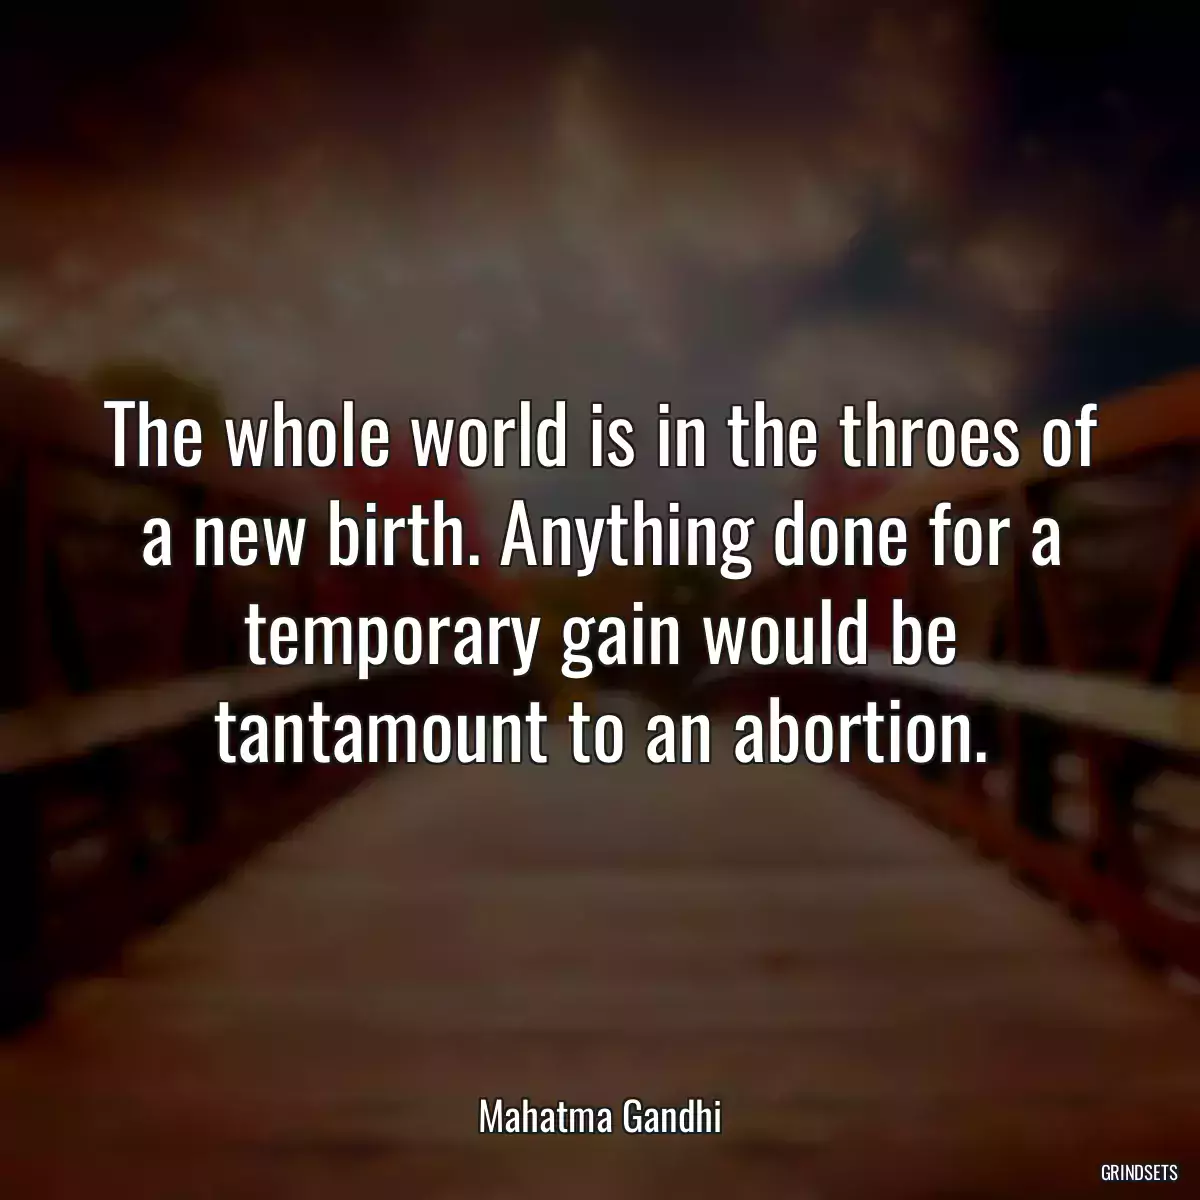 The whole world is in the throes of a new birth. Anything done for a temporary gain would be tantamount to an abortion.